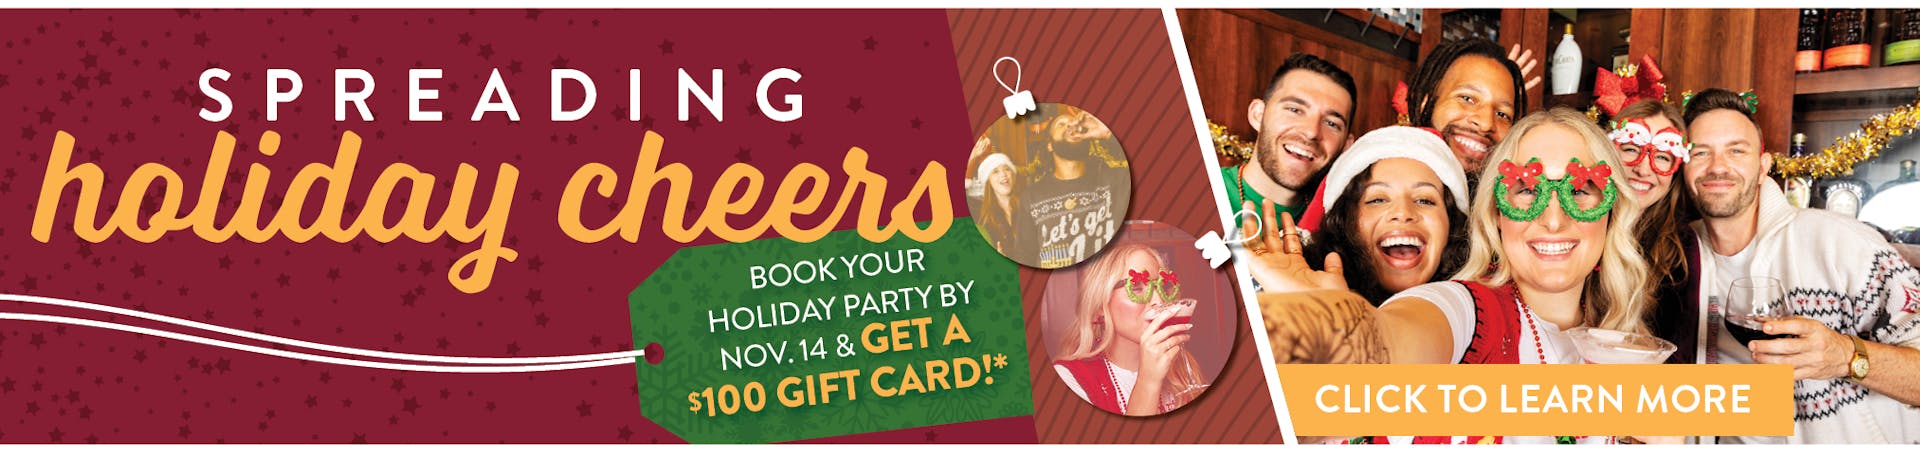 Spreading Holiday Cheers Book Your Holiday Party By Nov.14 & Get a $100 Gift Card!* Image of a group of people on holiday attire posing for a picture with drinks in hand